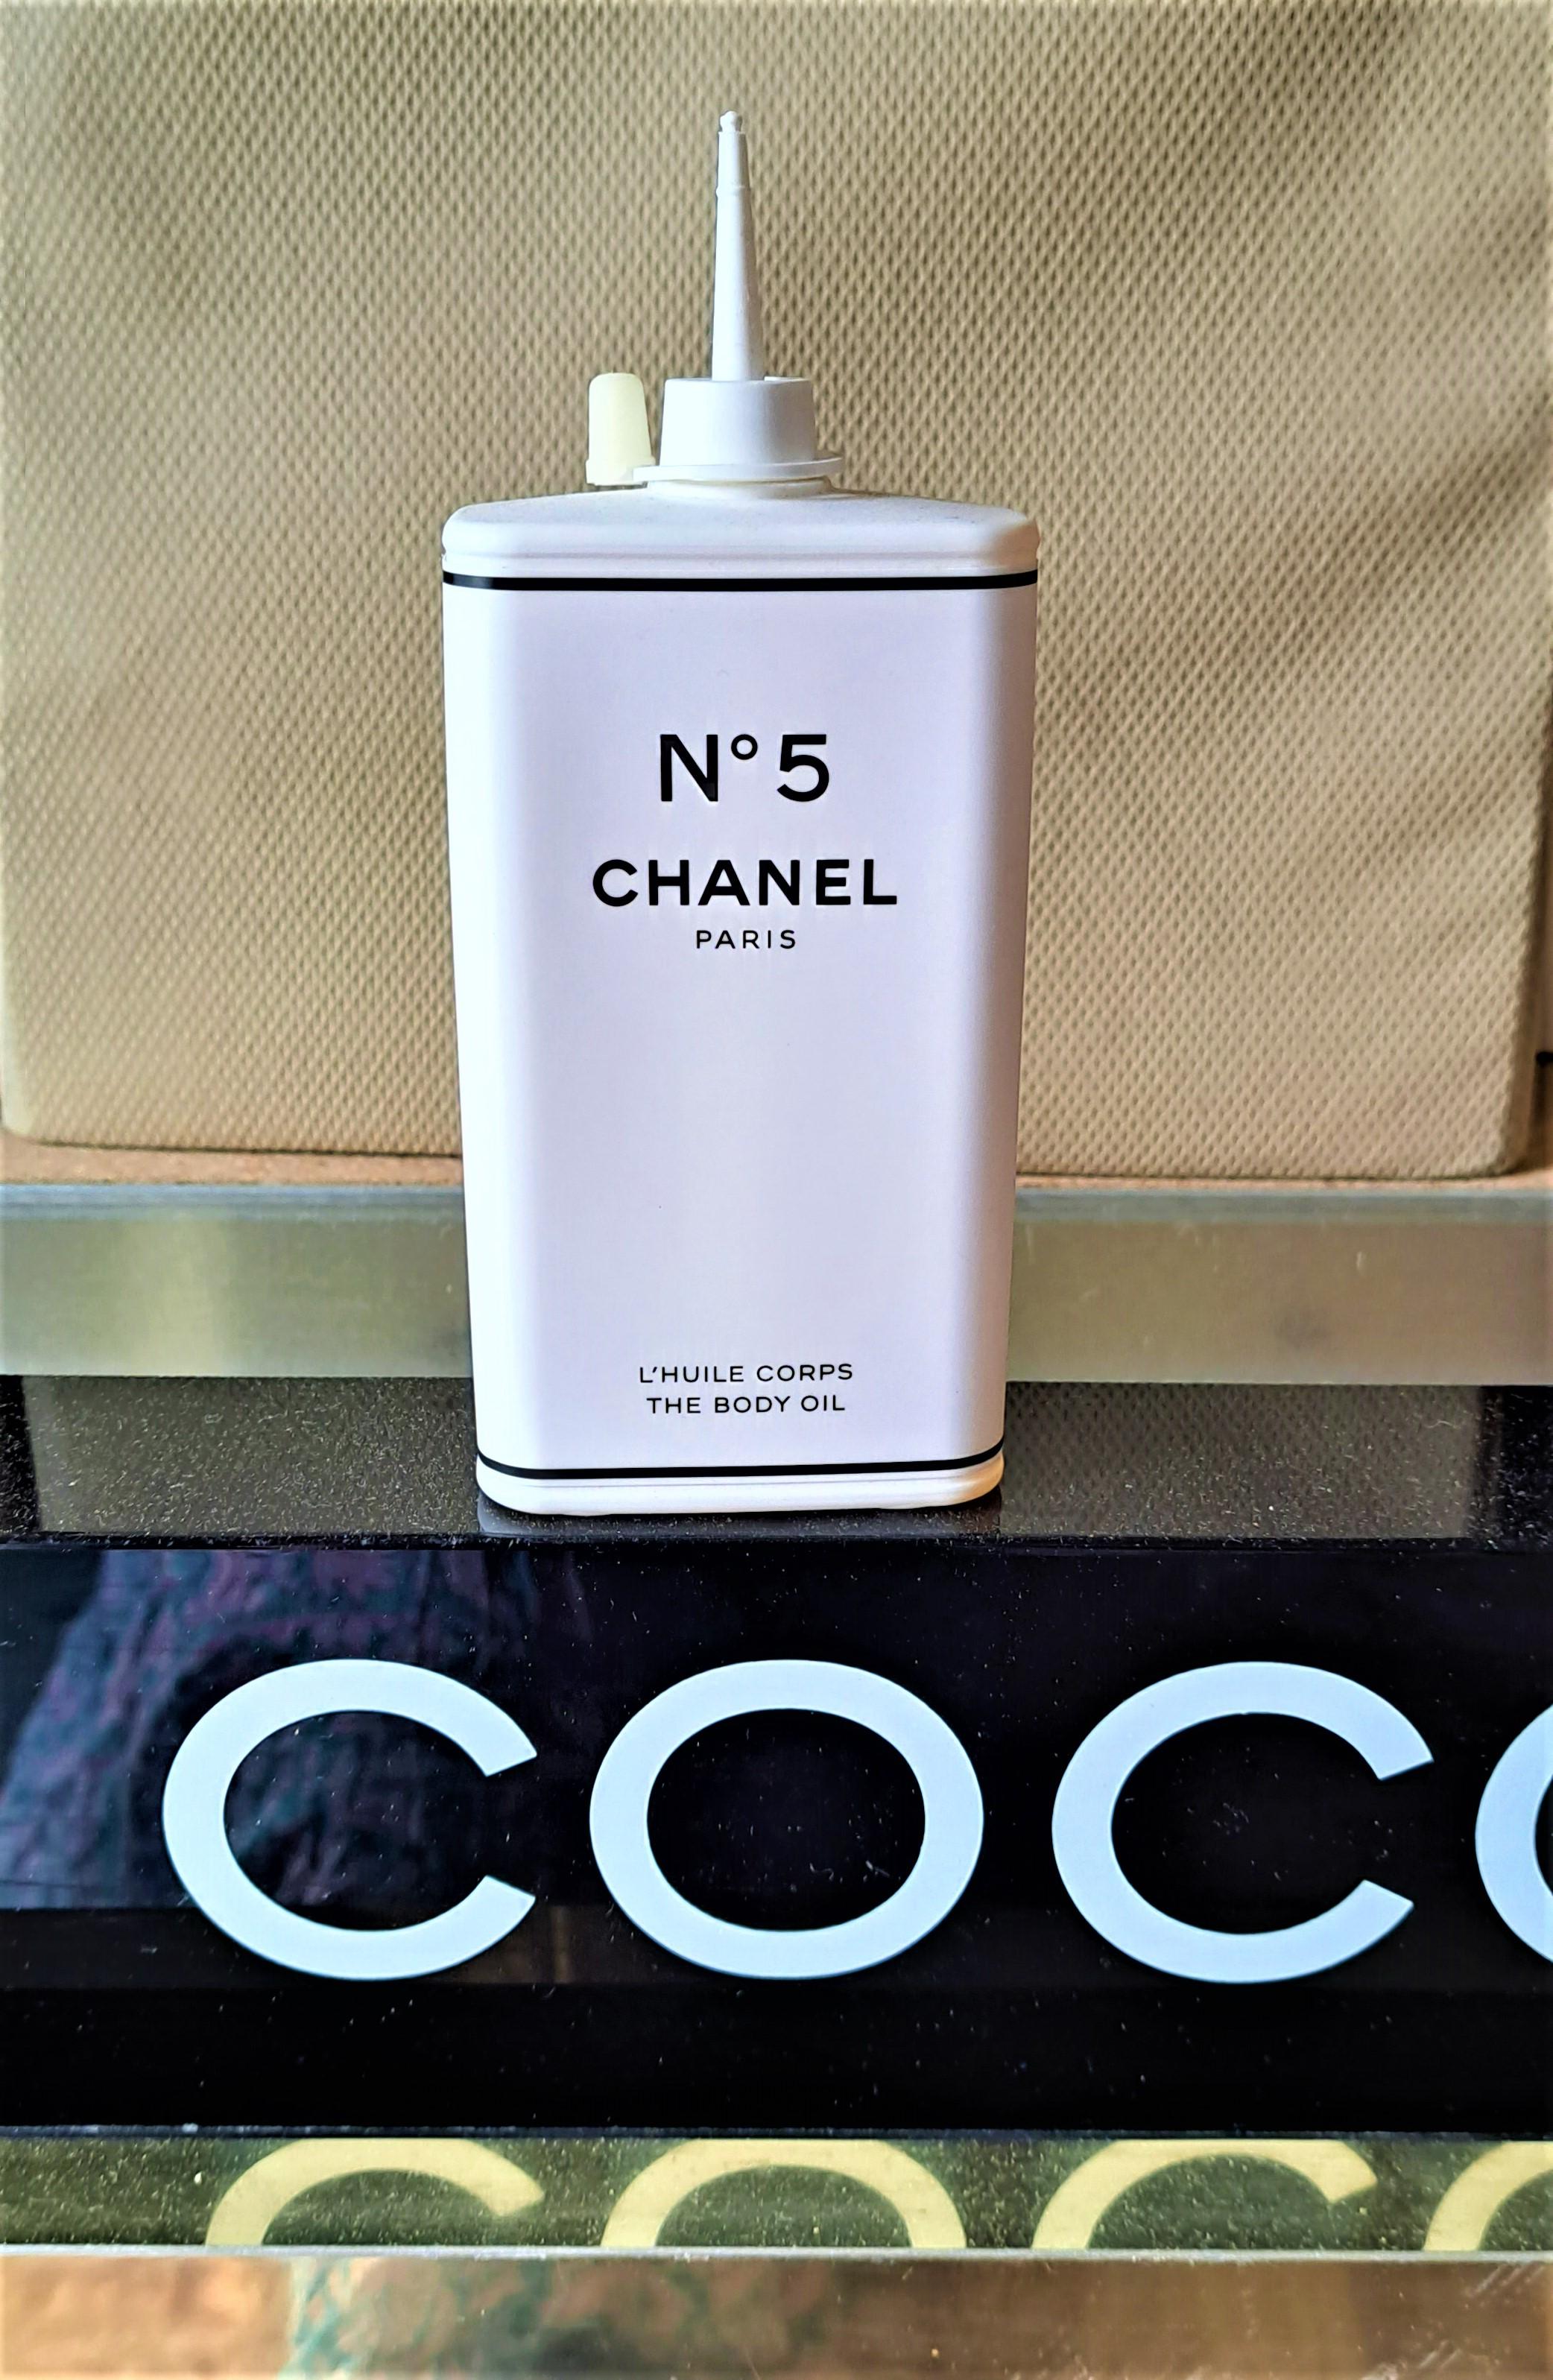 Chanel N°5 Factory Collection Limited Edition The Body Oil & Hair New (Blau) im Angebot